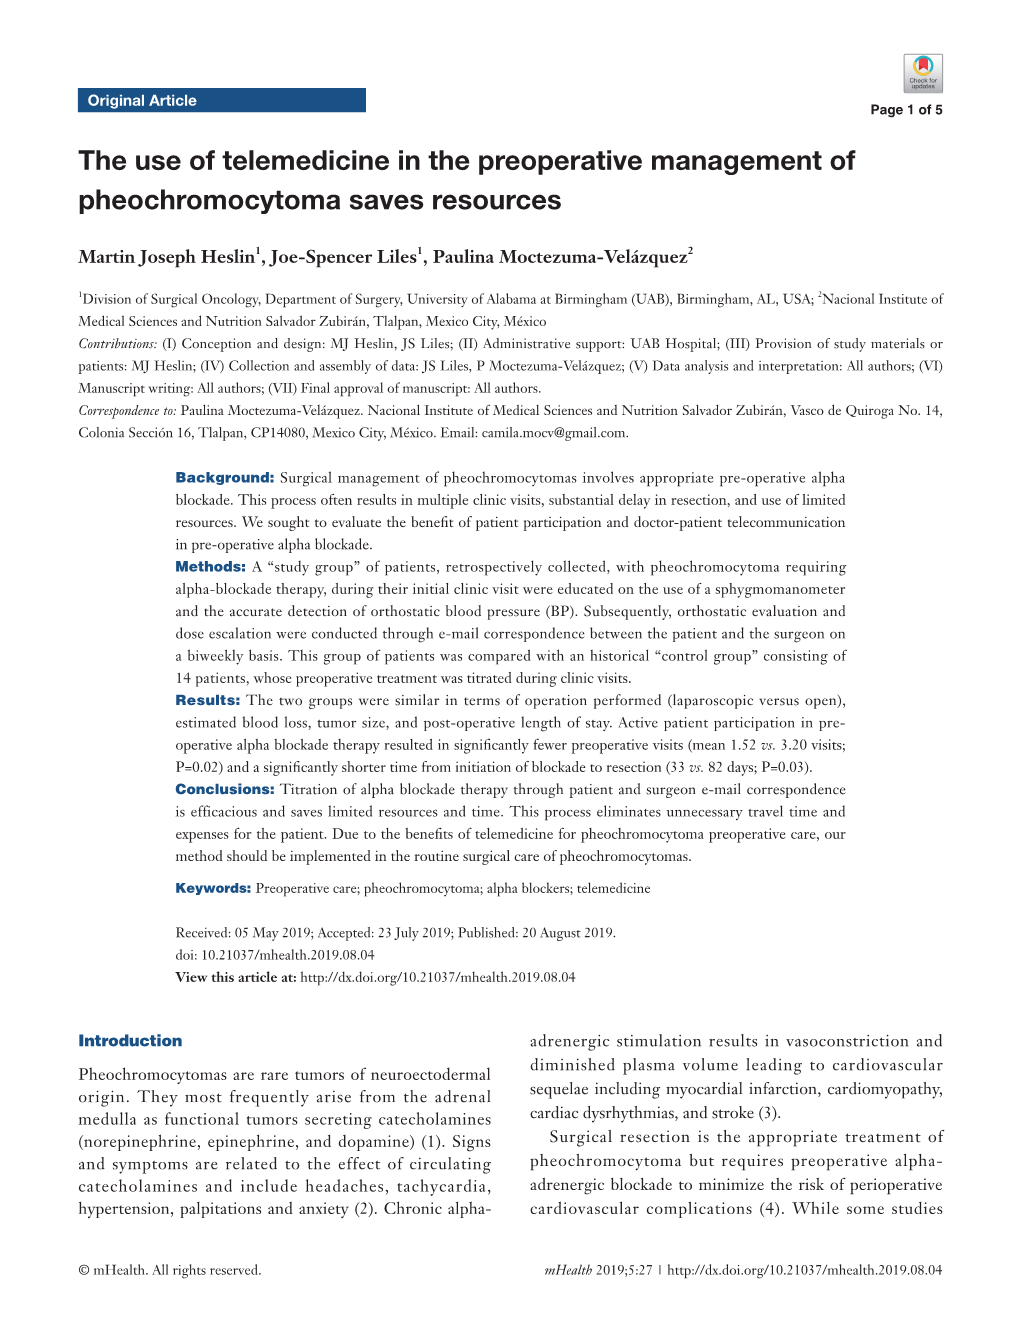 The Use of Telemedicine in the Preoperative Management of Pheochromocytoma Saves Resources